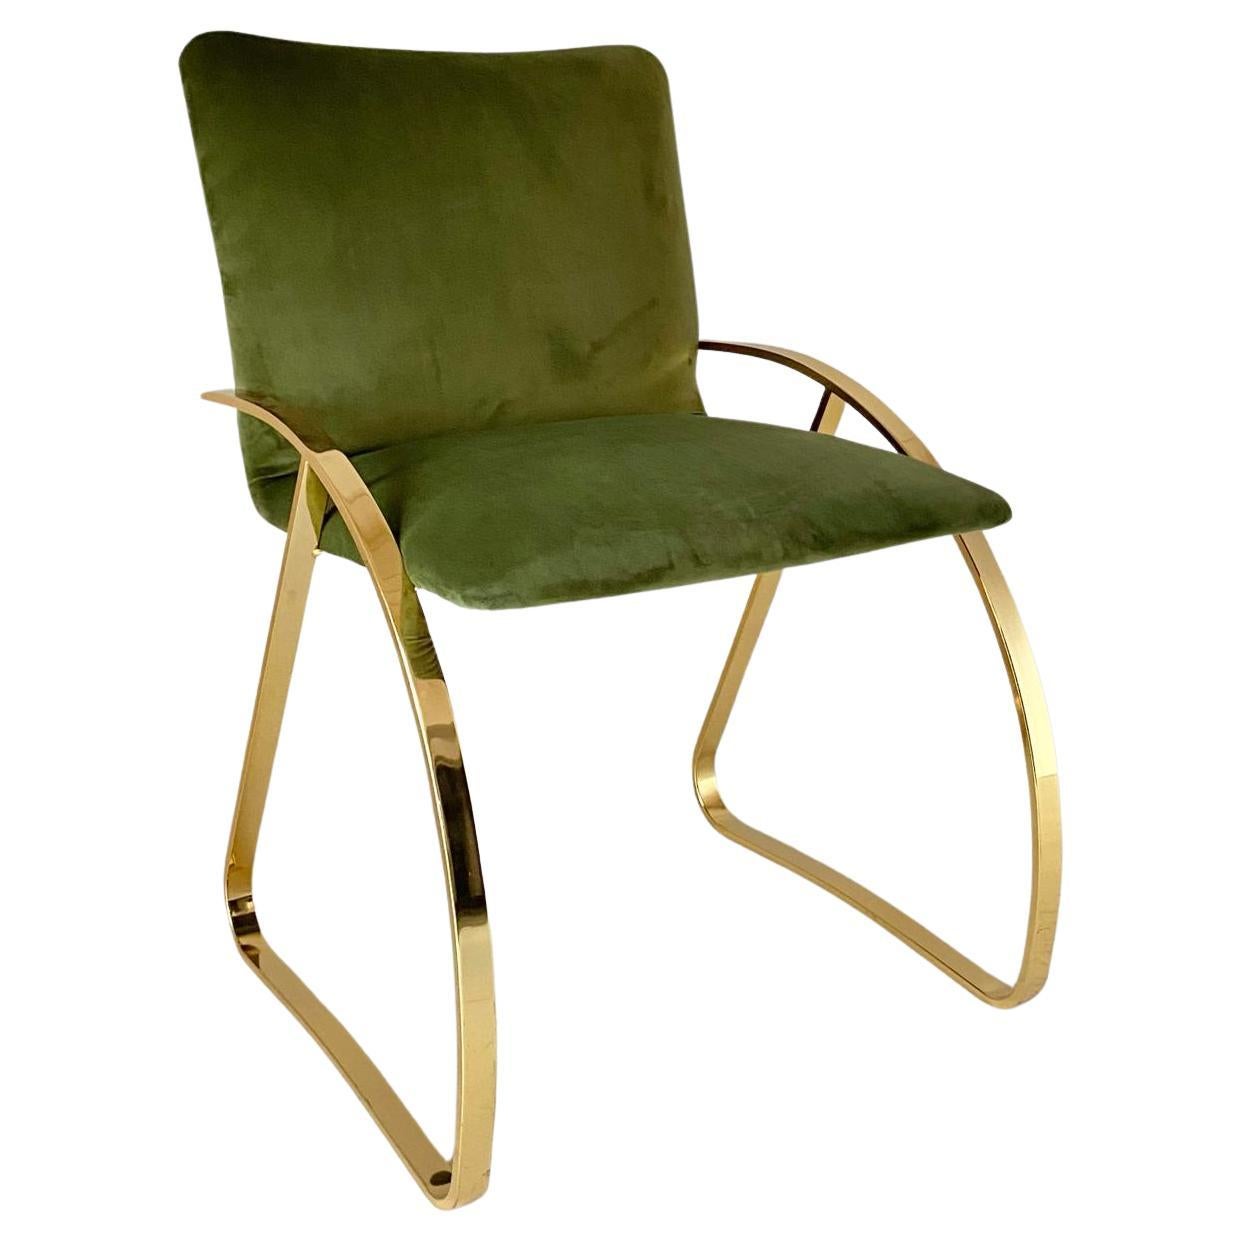 Mid-Century Modern Vintage Desk Chair with Green Velvet Cover and Gold frame, Italy 1970s For Sale